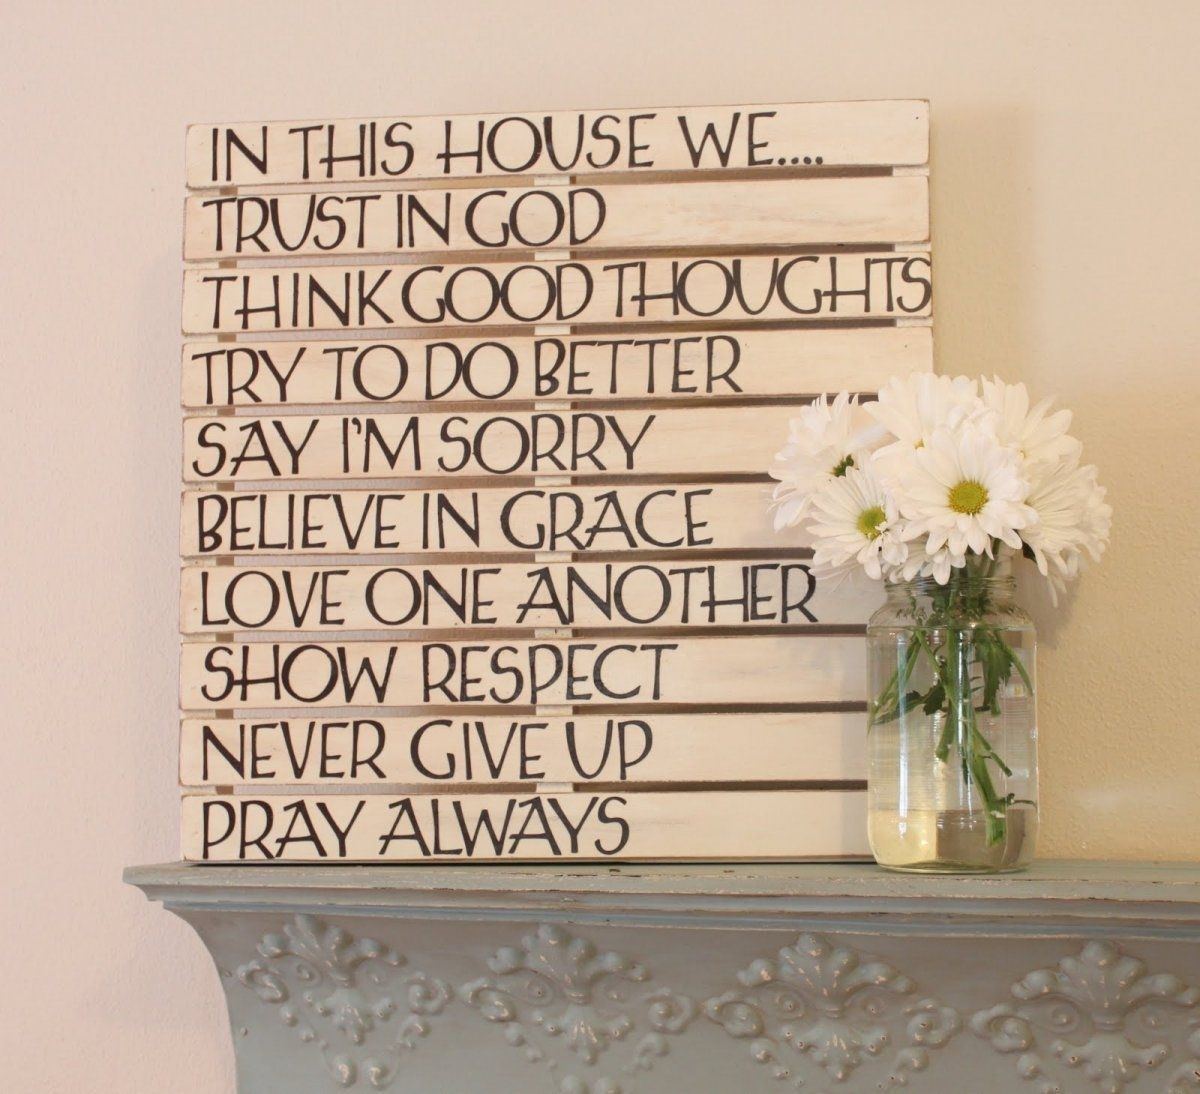 Wooden Wall Art Inspirational Quotes Quotesgram, Wood Wall Art Inside Wood Wall Art Quotes (View 12 of 20)